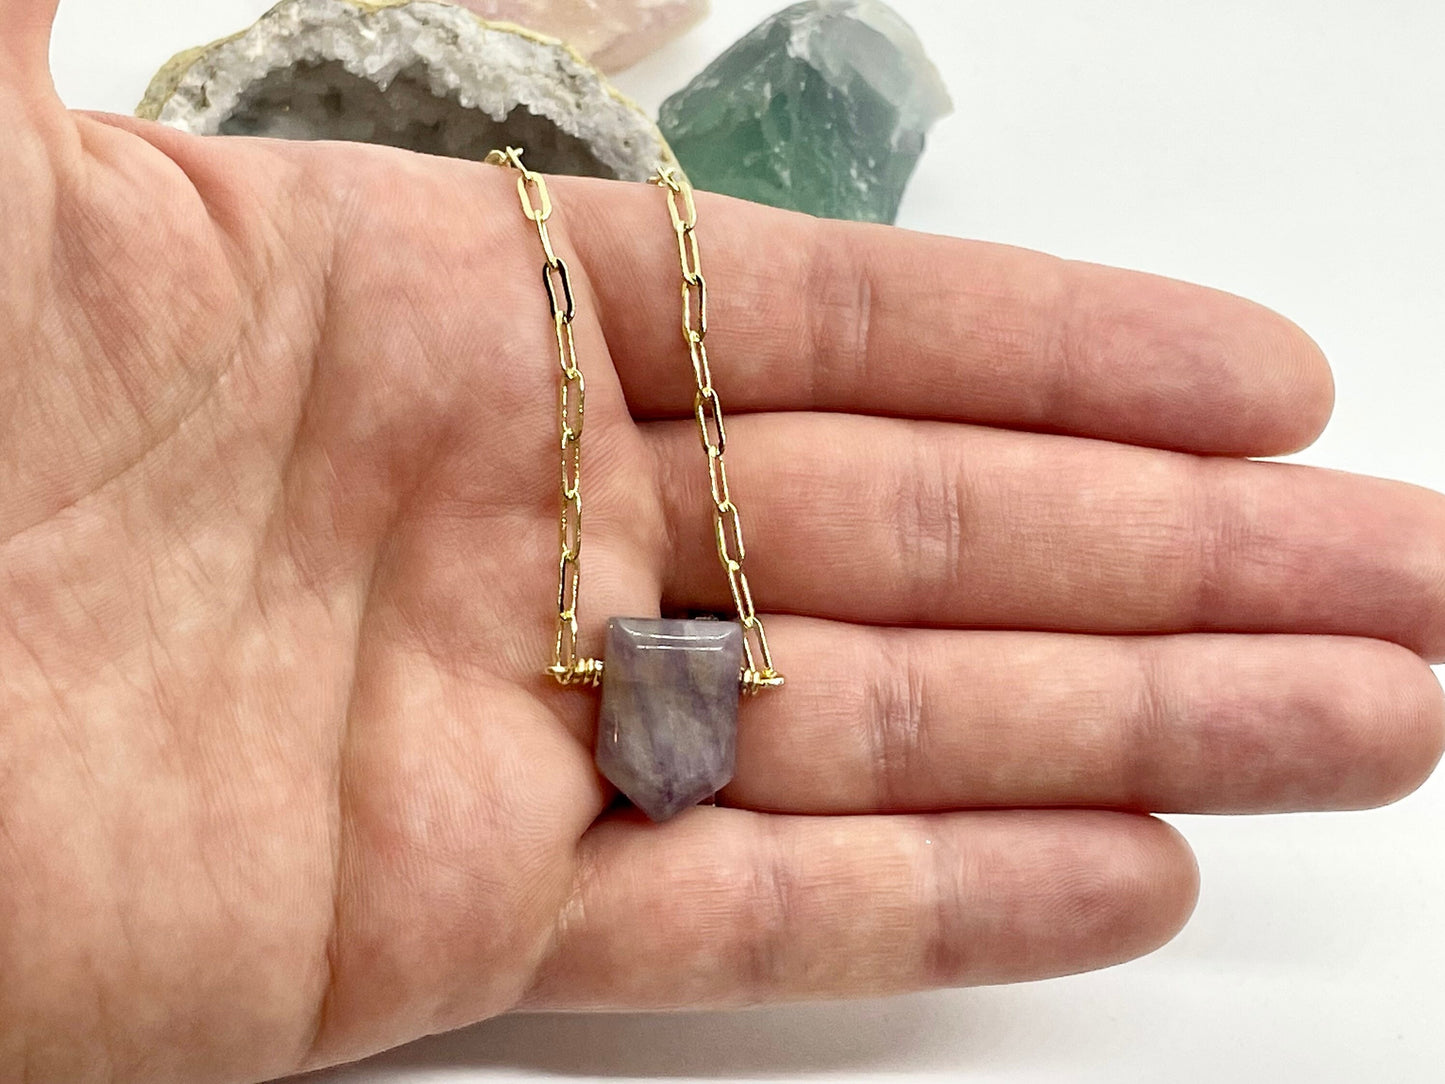 Amethyst Necklace, Amethyst Arrow Necklace, Amethyst Crystal Necklace, Paper Clip Necklace, Minimal Layering Necklace, Fairycore Jewelry